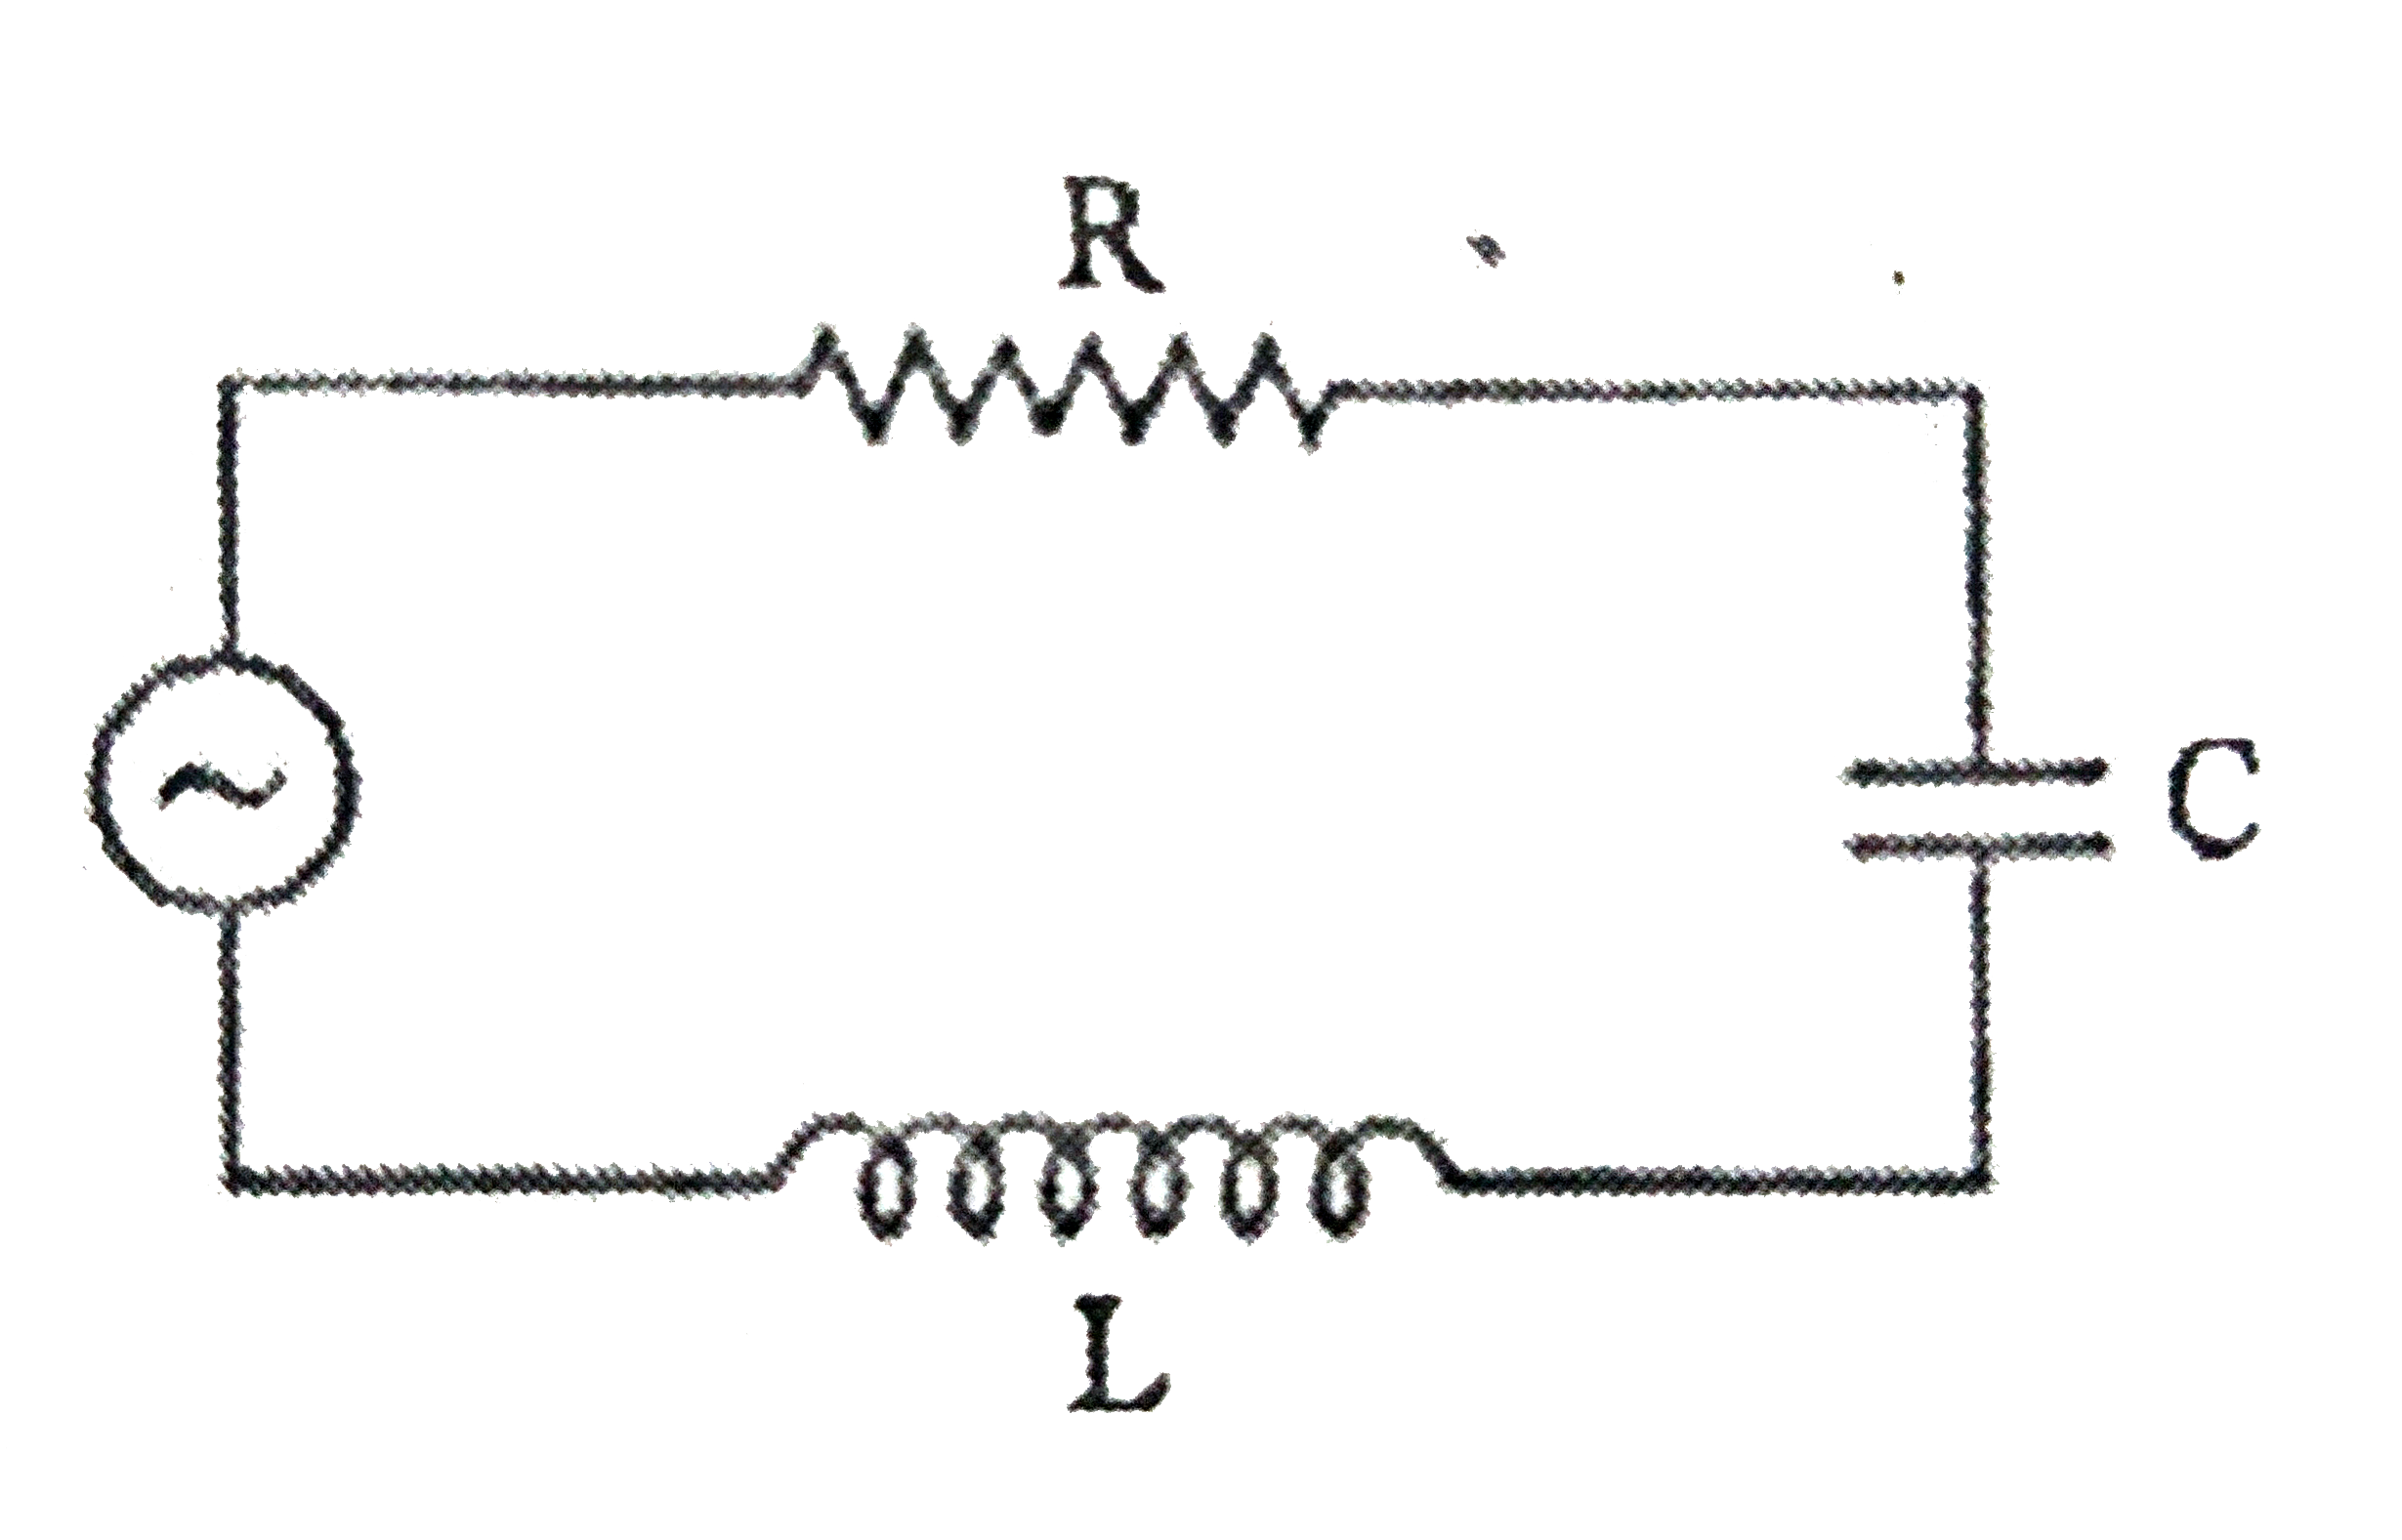 The figure shows a series LCR circuit with L=10.0 H(2), C=40 mu F, R=60 Omega connected to a variable frequency 240 V source. Calculate   (i) The angular frequency of the source which drives the circuit at resonance.   (ii) The current at the resonating frequency.   (iii) The rms potential drop across the capacitor at resonance.